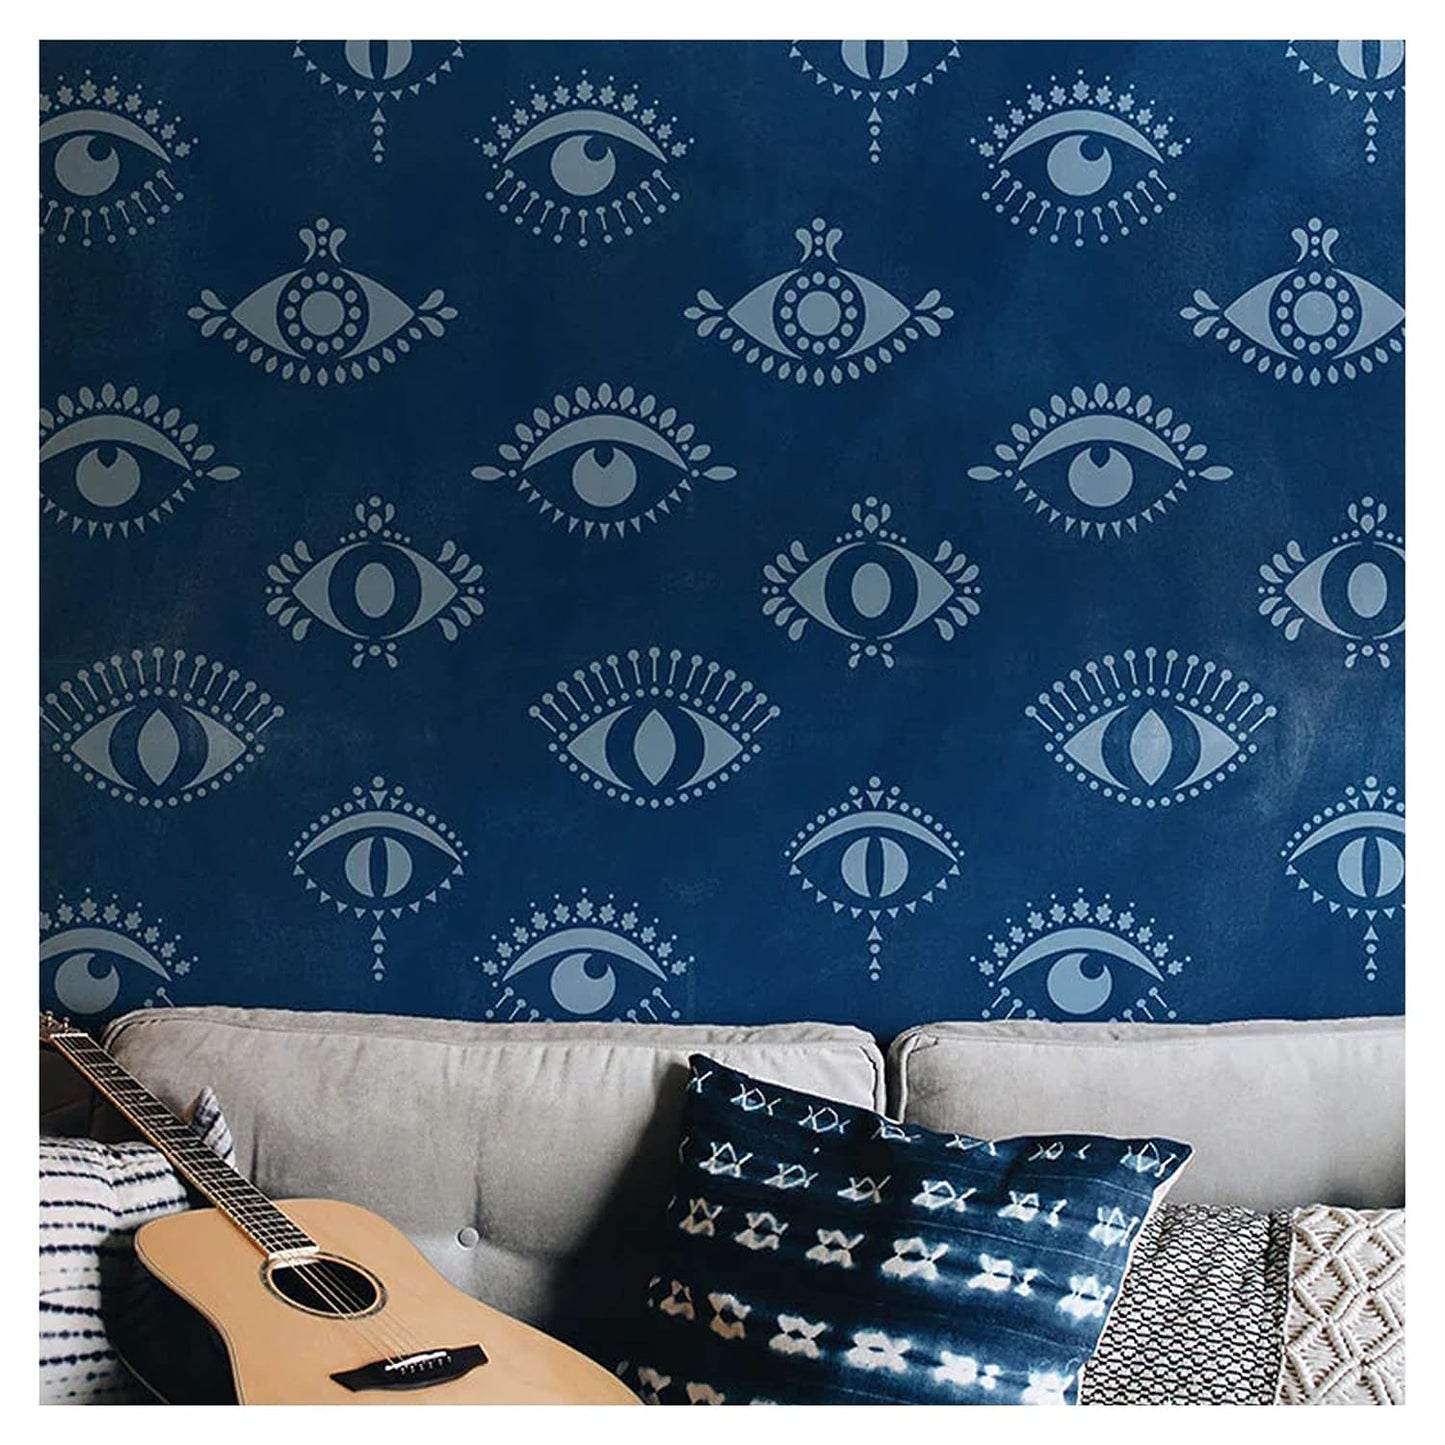 Latest Pretty Eyes Design Stencils for Wall Painting - Pack of 1, Sheet Size 24 x 36 inch/Design for Wall Painting 22 x 34 inch - Medium